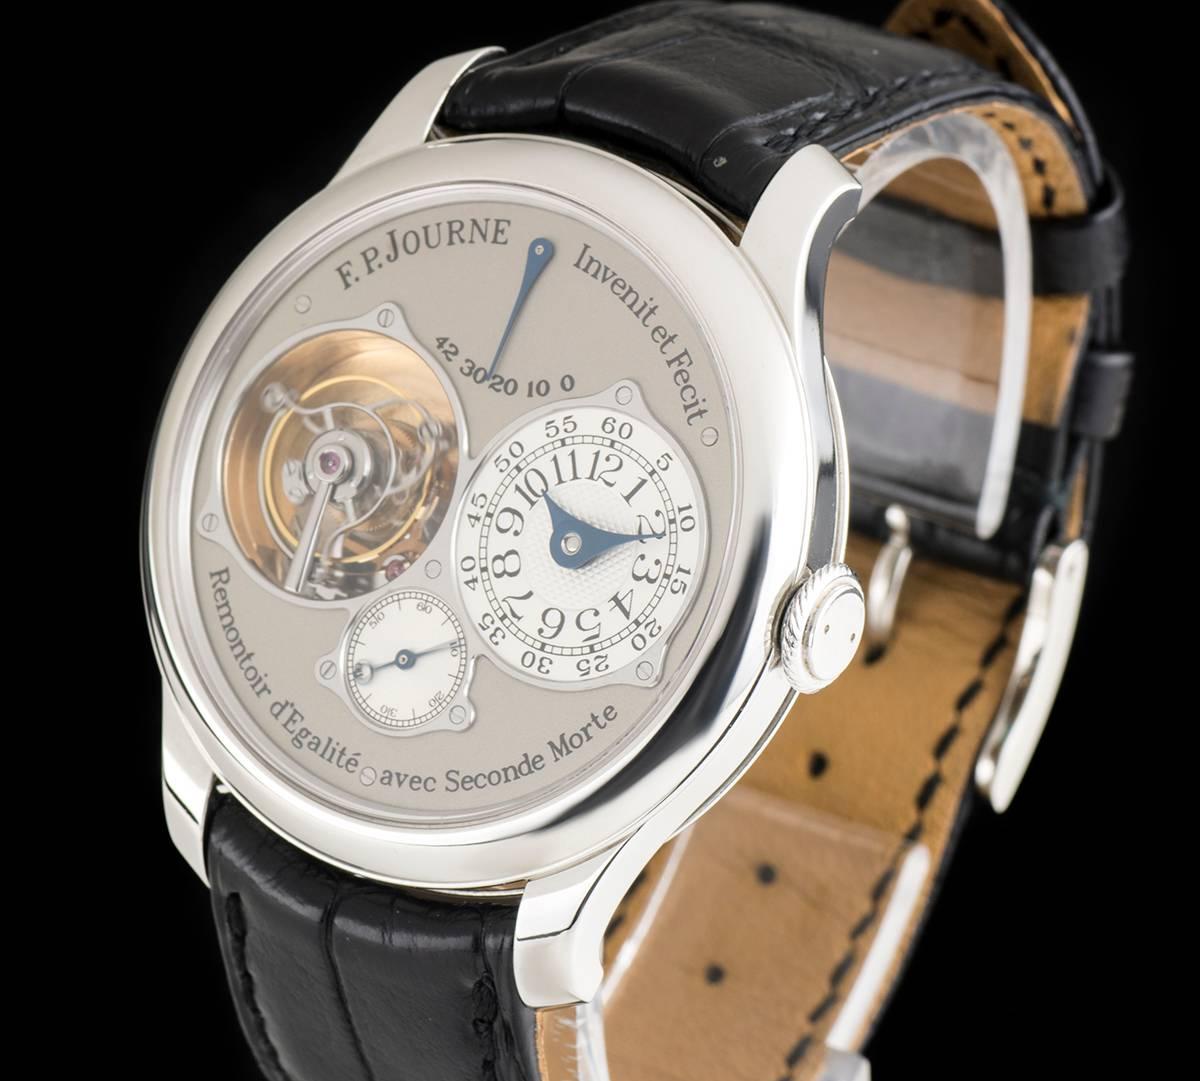 A Platinum Tourbillon Souveraine Dead Beat Seconds Gents Wristwatch, silver dial, sub-dial at 3 0'clock indicating hours and minutes, sub-dial at 6 0'clock featuring dead beat small seconds, tourbillon display at 9 0'clock, power reserve display at